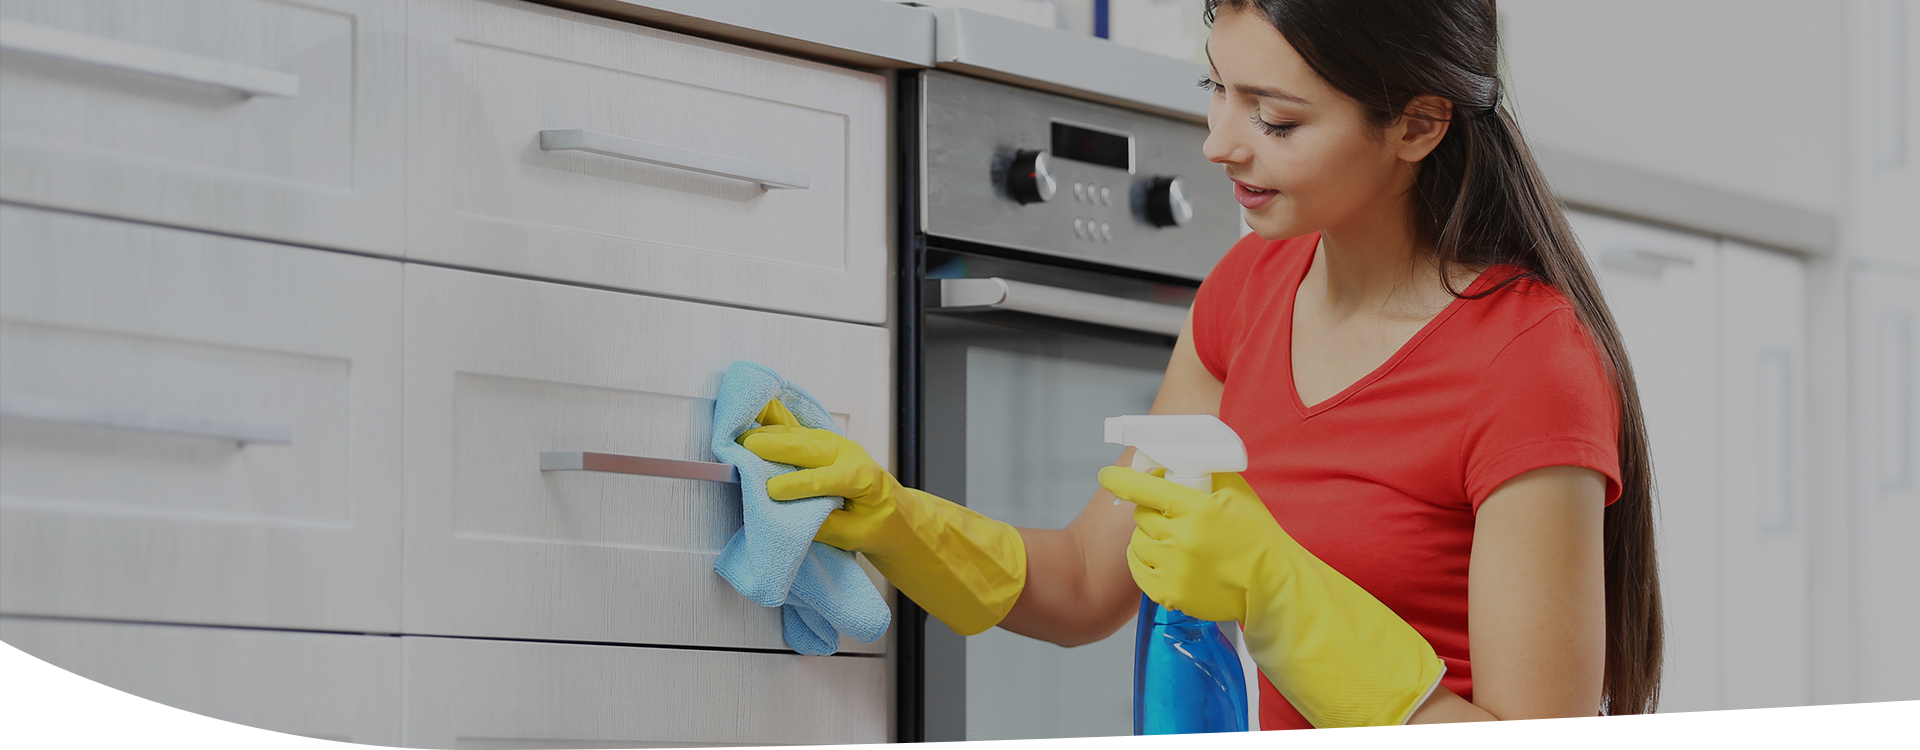 professional home cleaning services mumbai